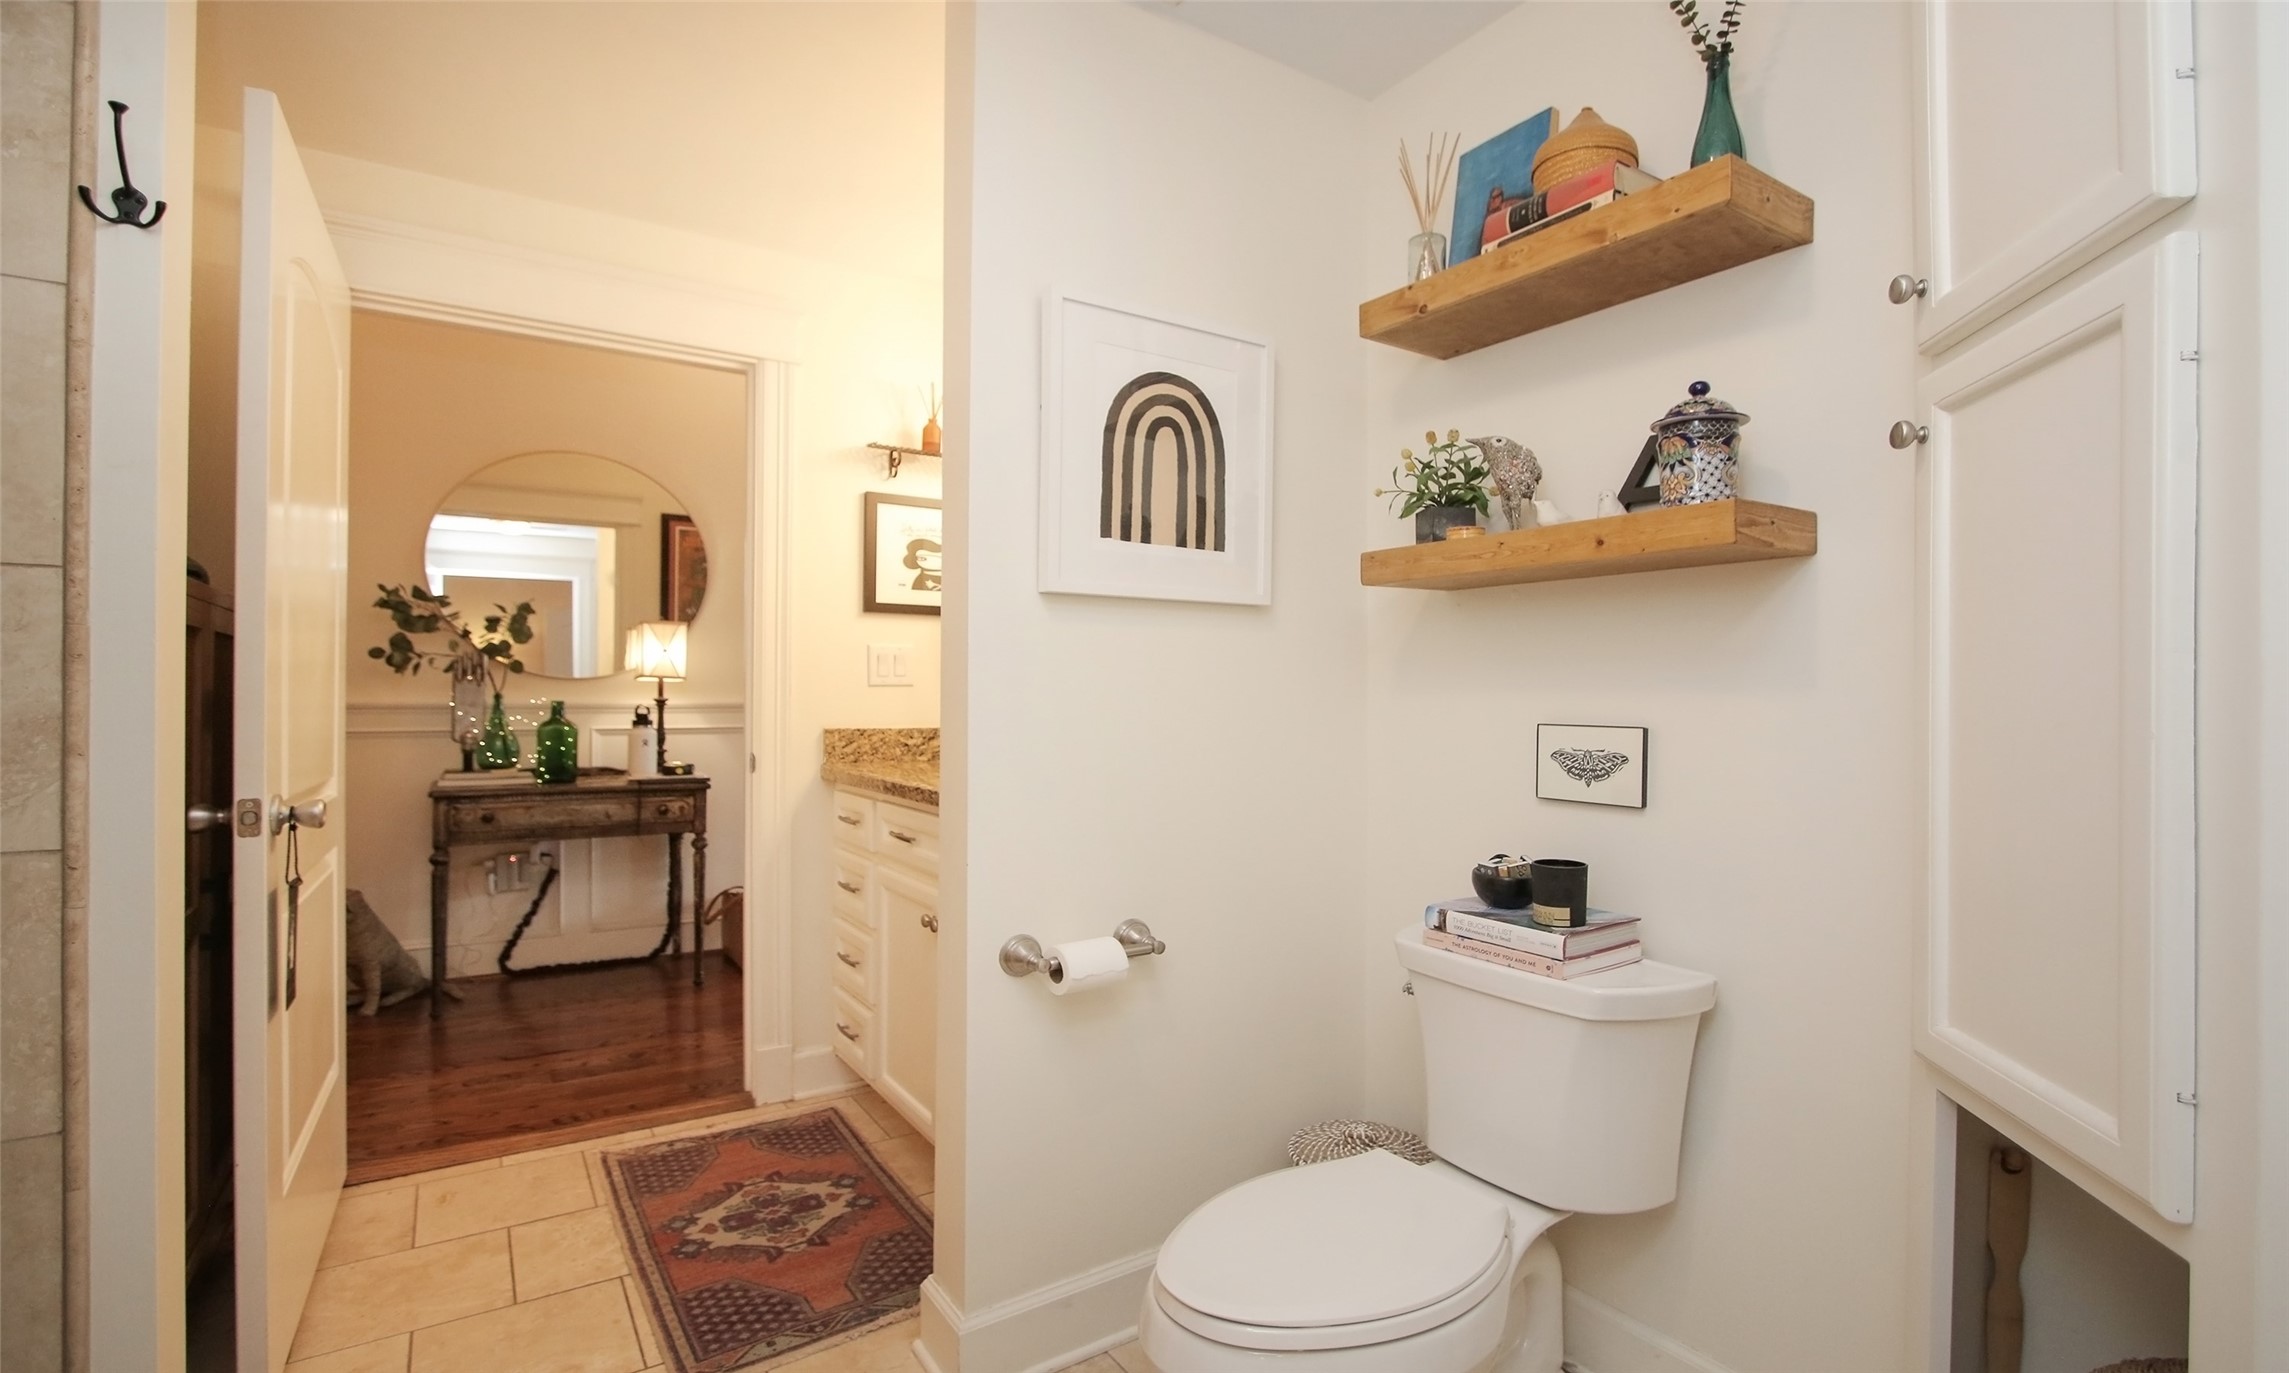 Character galore even in the bathroom with built in corner cabinets and great storage.